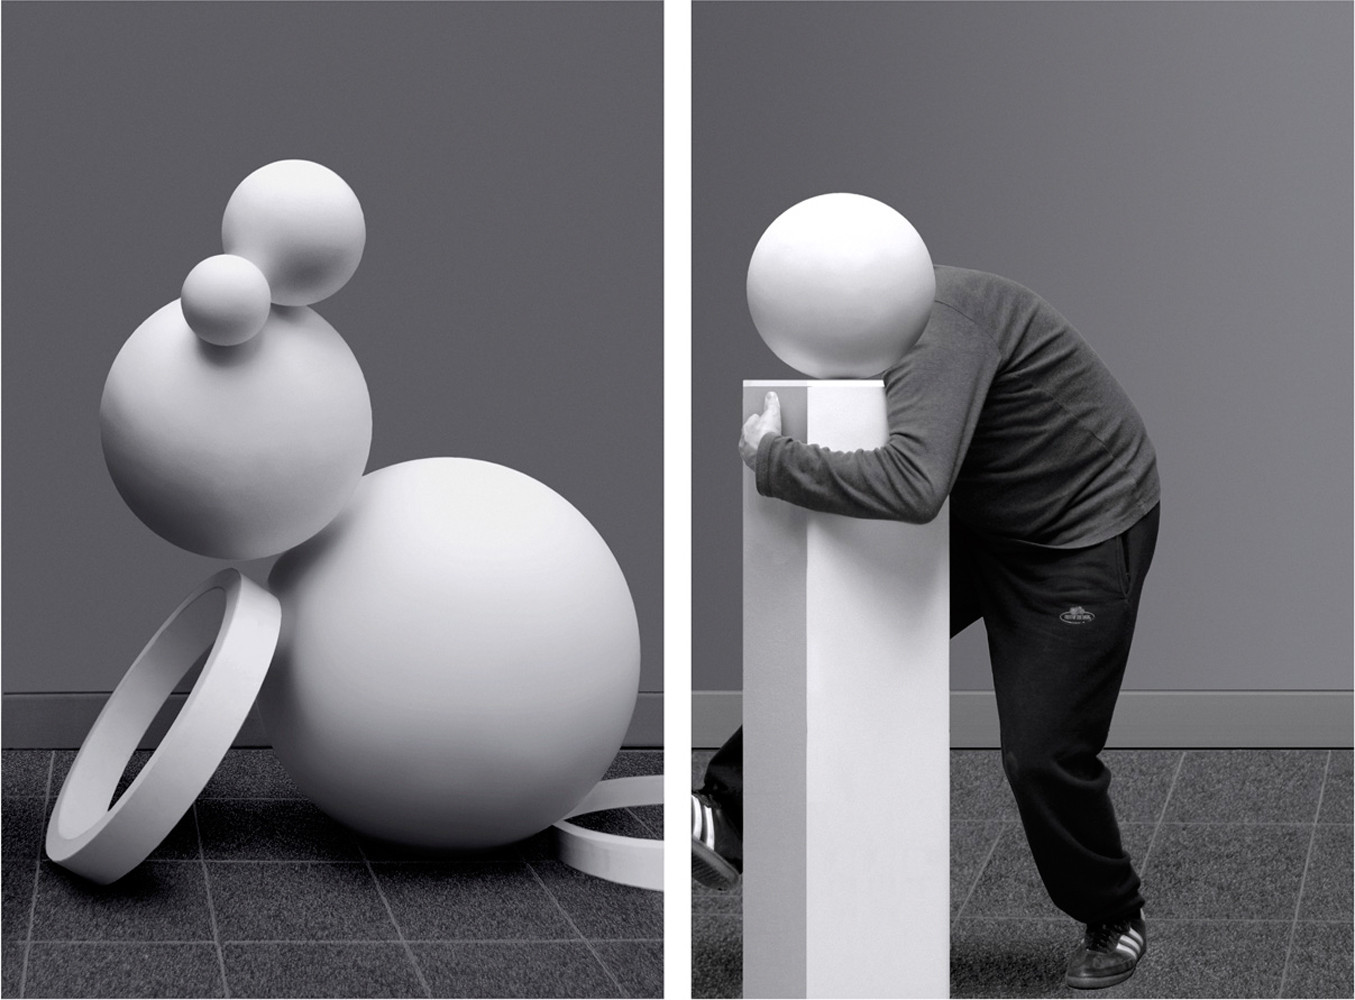 Anna & Bernhard Blume, ‘Aktionsmetaphern’, 2011, Diptych from the series Trans-Skulptur, Inkjet on Ilford Pearl Paper